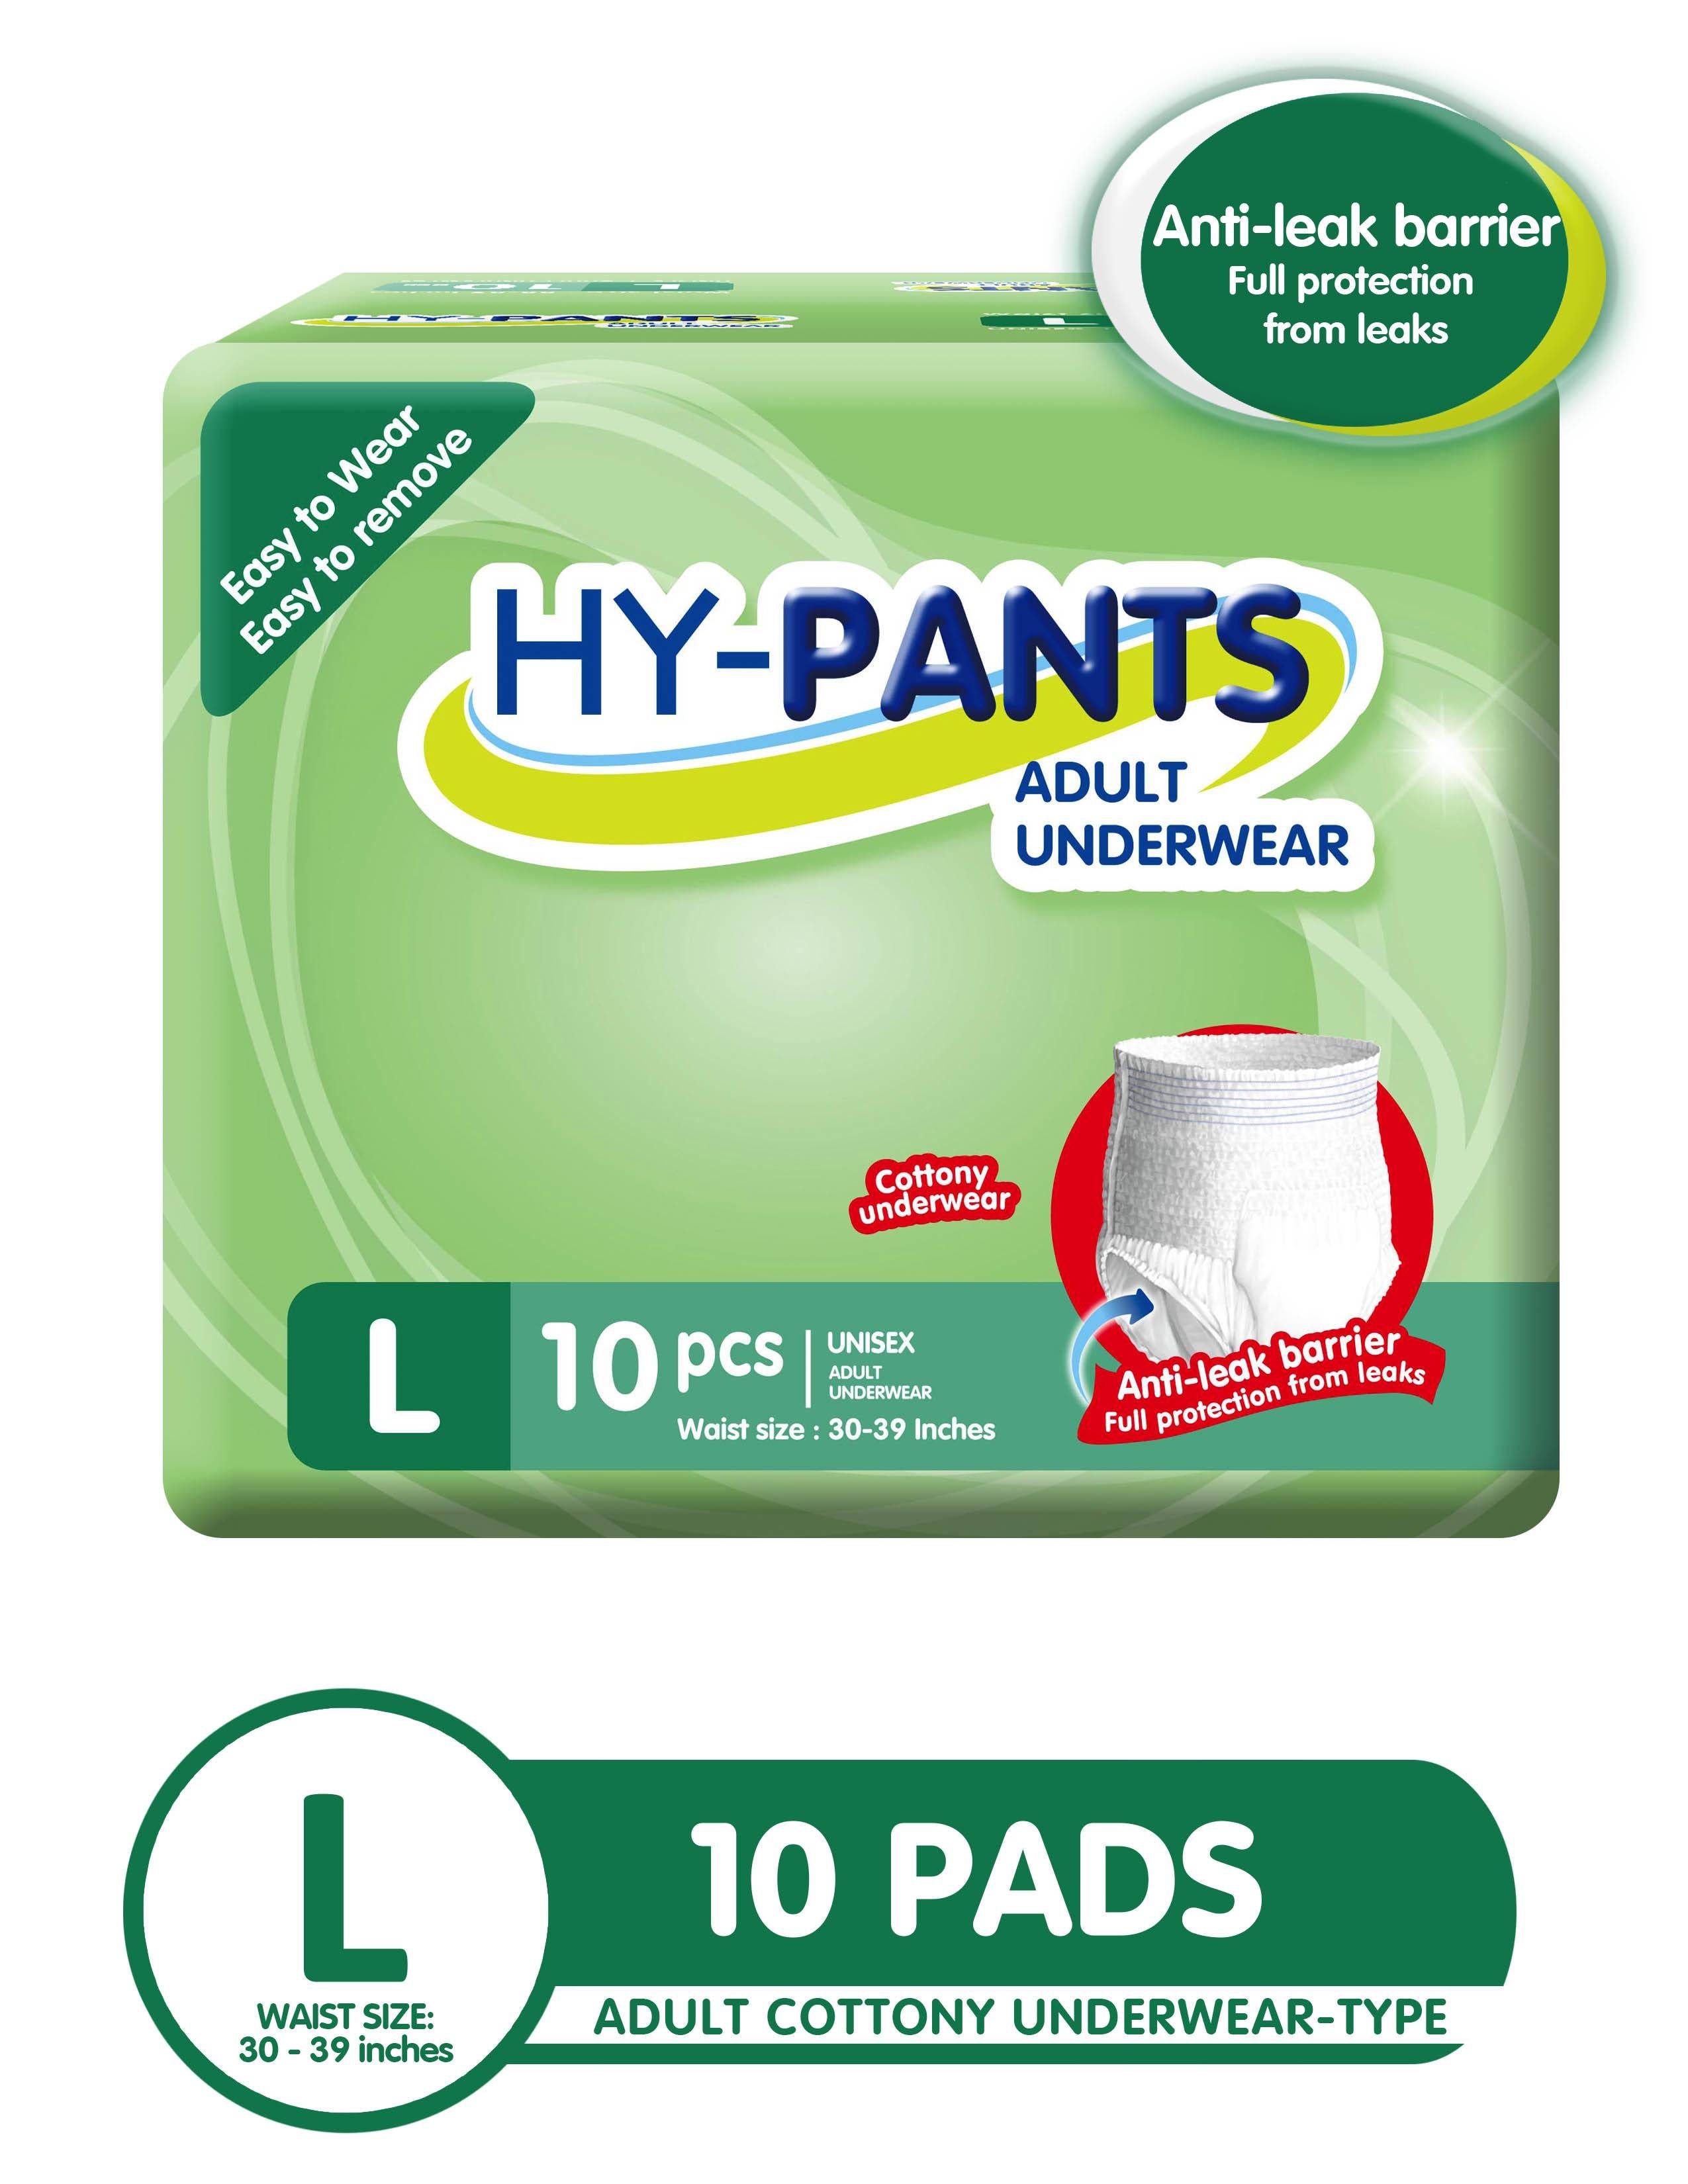 Hy-pants Adult Underwear Large - 1 Pack of 10 Pads